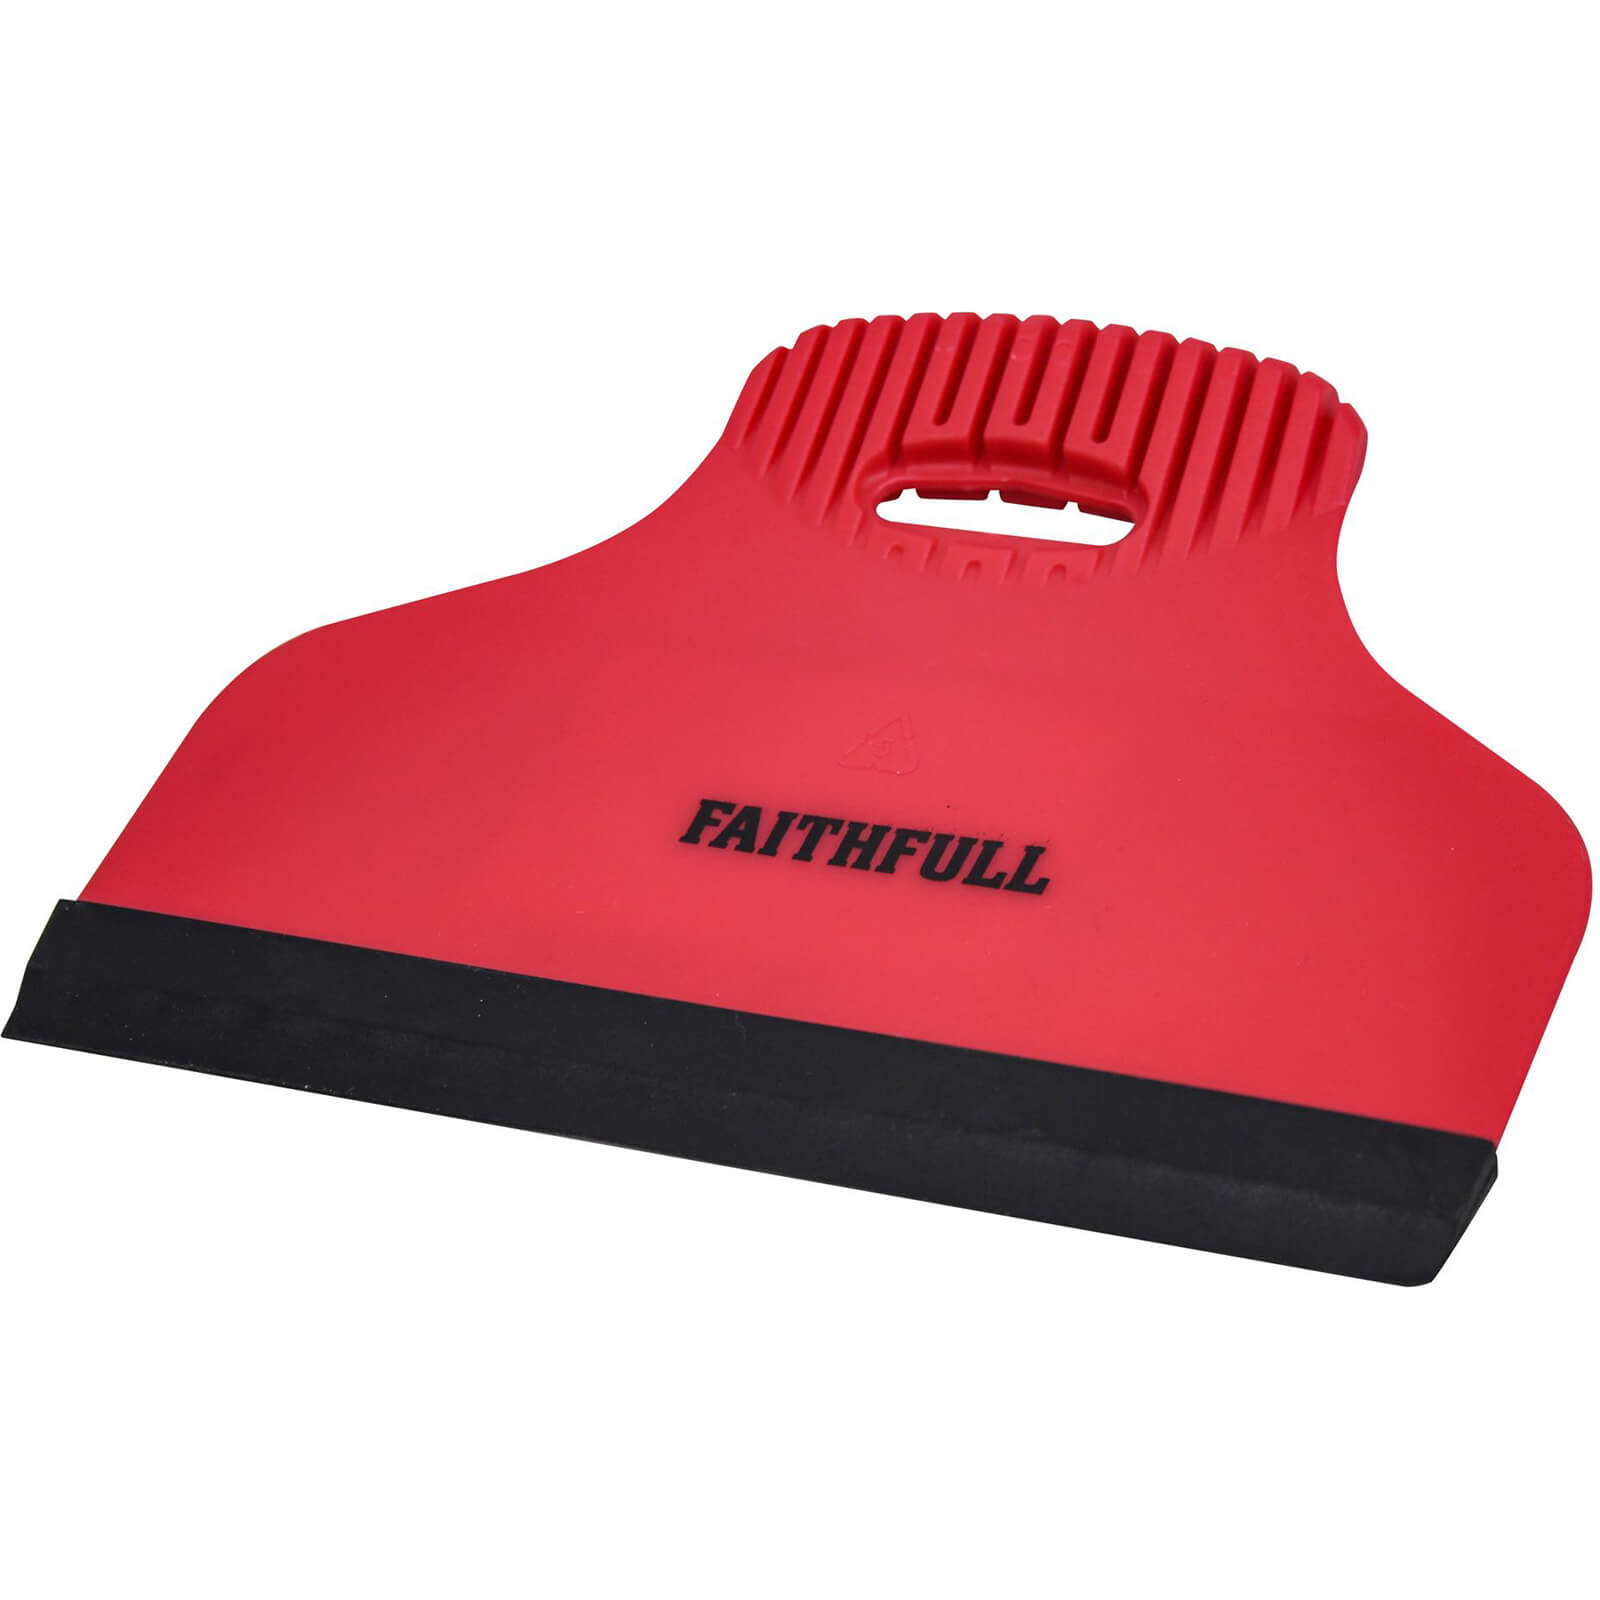 Photo of Faithfull Tile Squeegee 190mm